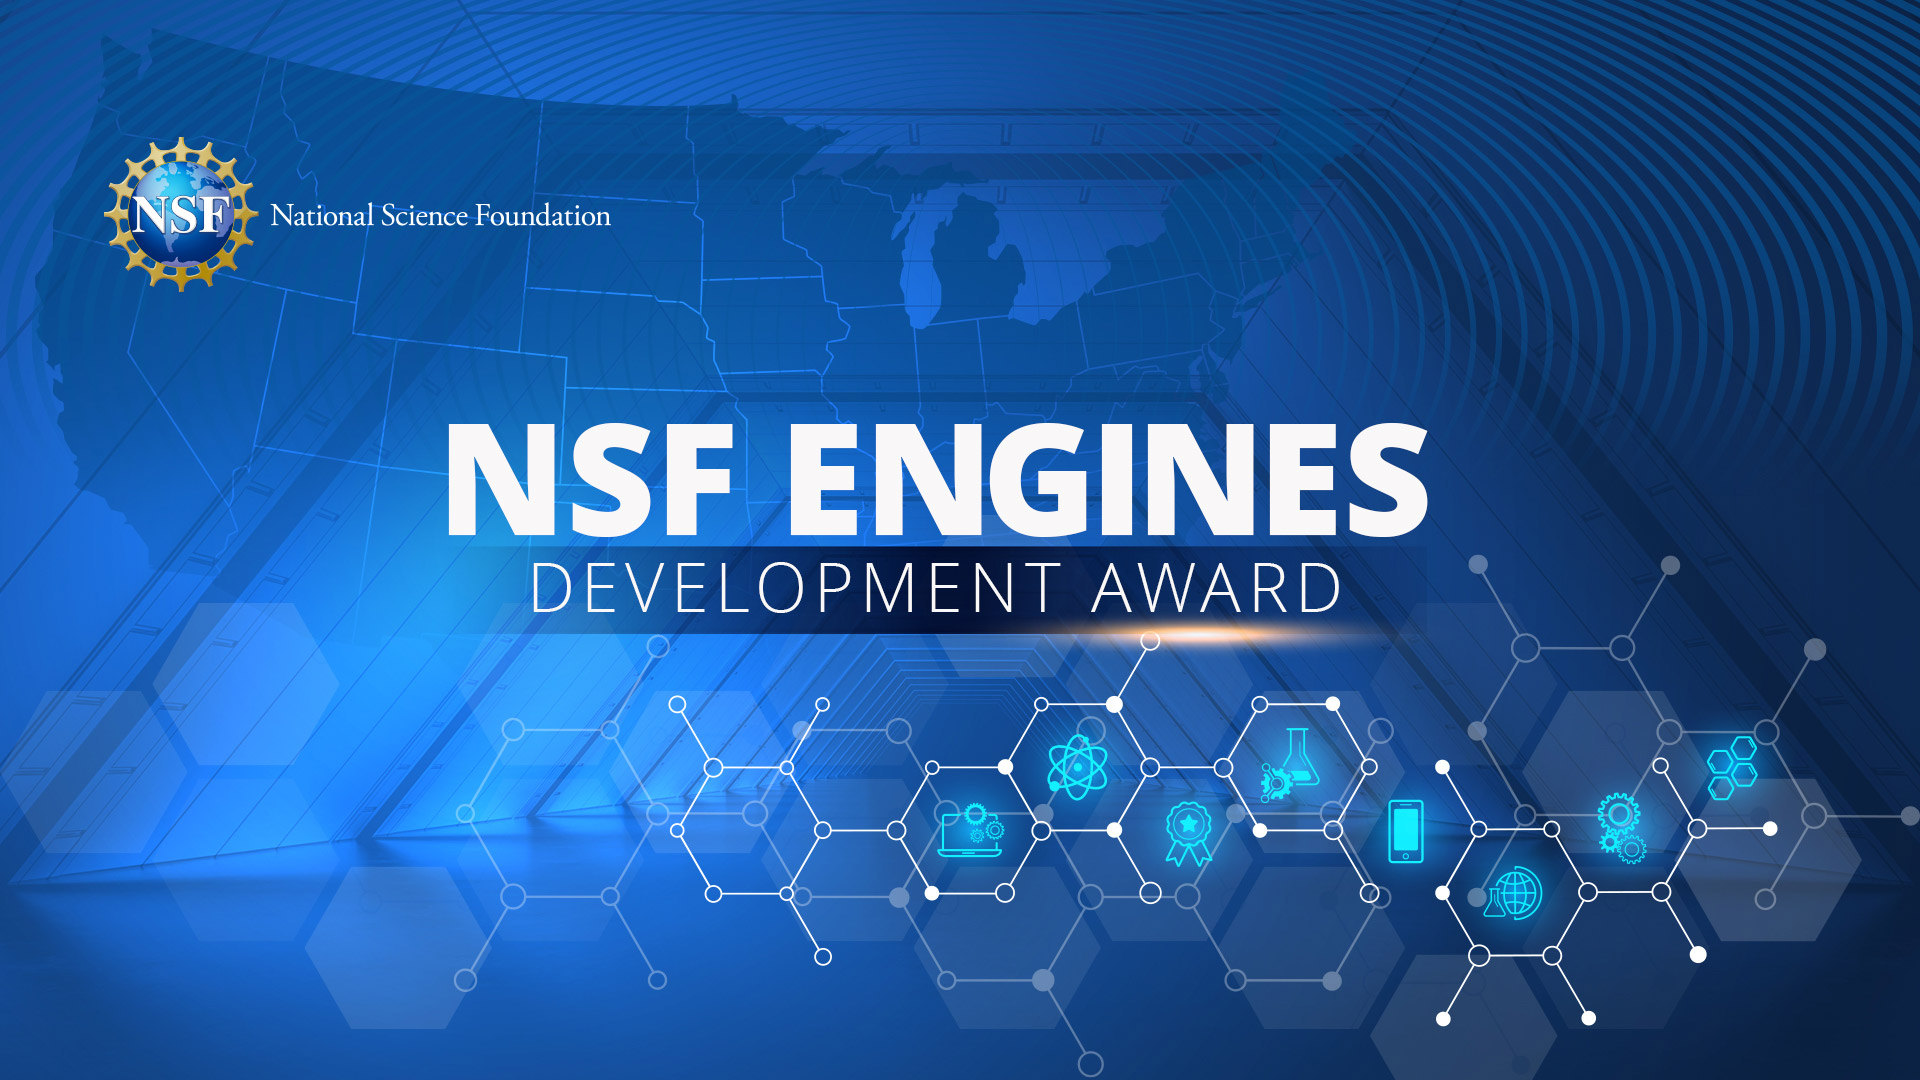 The North Carolina Ecosystem Technology project has been awarded $1 million from the U.S. National Science Foundation's Regional Innovation Engines, or NSF Engines.